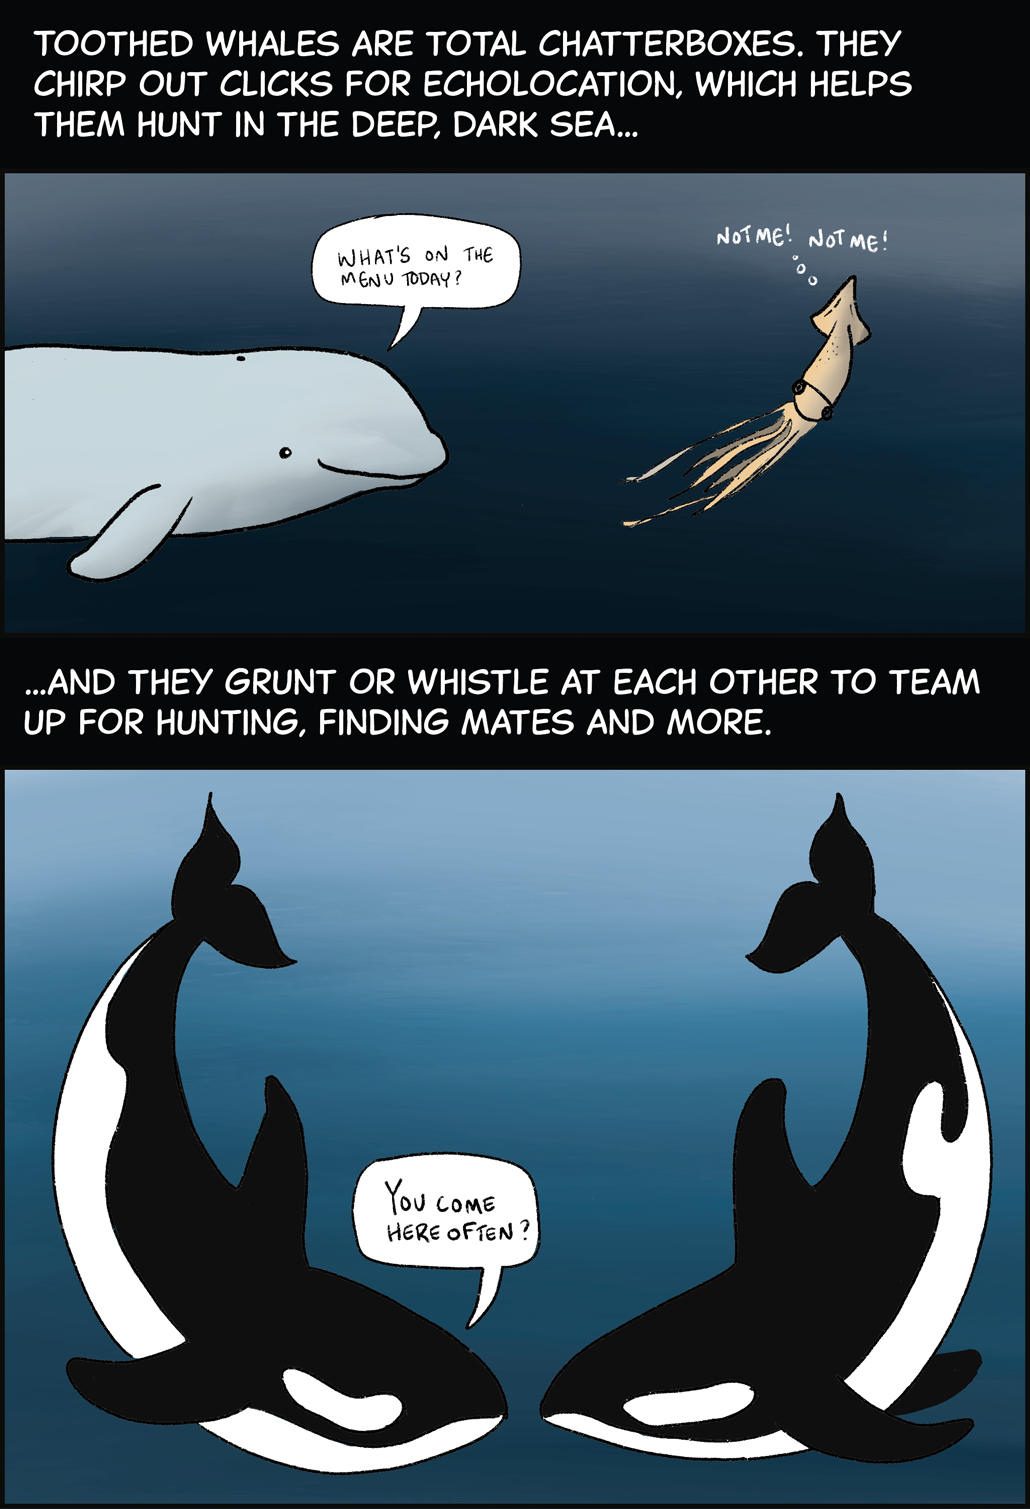 Text (above first image): Toothed whales are total chatterboxes. They chirp out clicks for echolocation, which helps them hunt in the deep, dark sea… First Image: a beluga whale swims after a squid in dark waters. The whale is saying, “What’s on the menu today?” and the squid is saying, “Not me! Not me!” Text (below first image, above second image): …and they grunt or whistle at each other to team up for hunting, finding mates and more. Second Image: Two orcas swim near each other with their noses almost touching. One is saying, “You come here often?” 